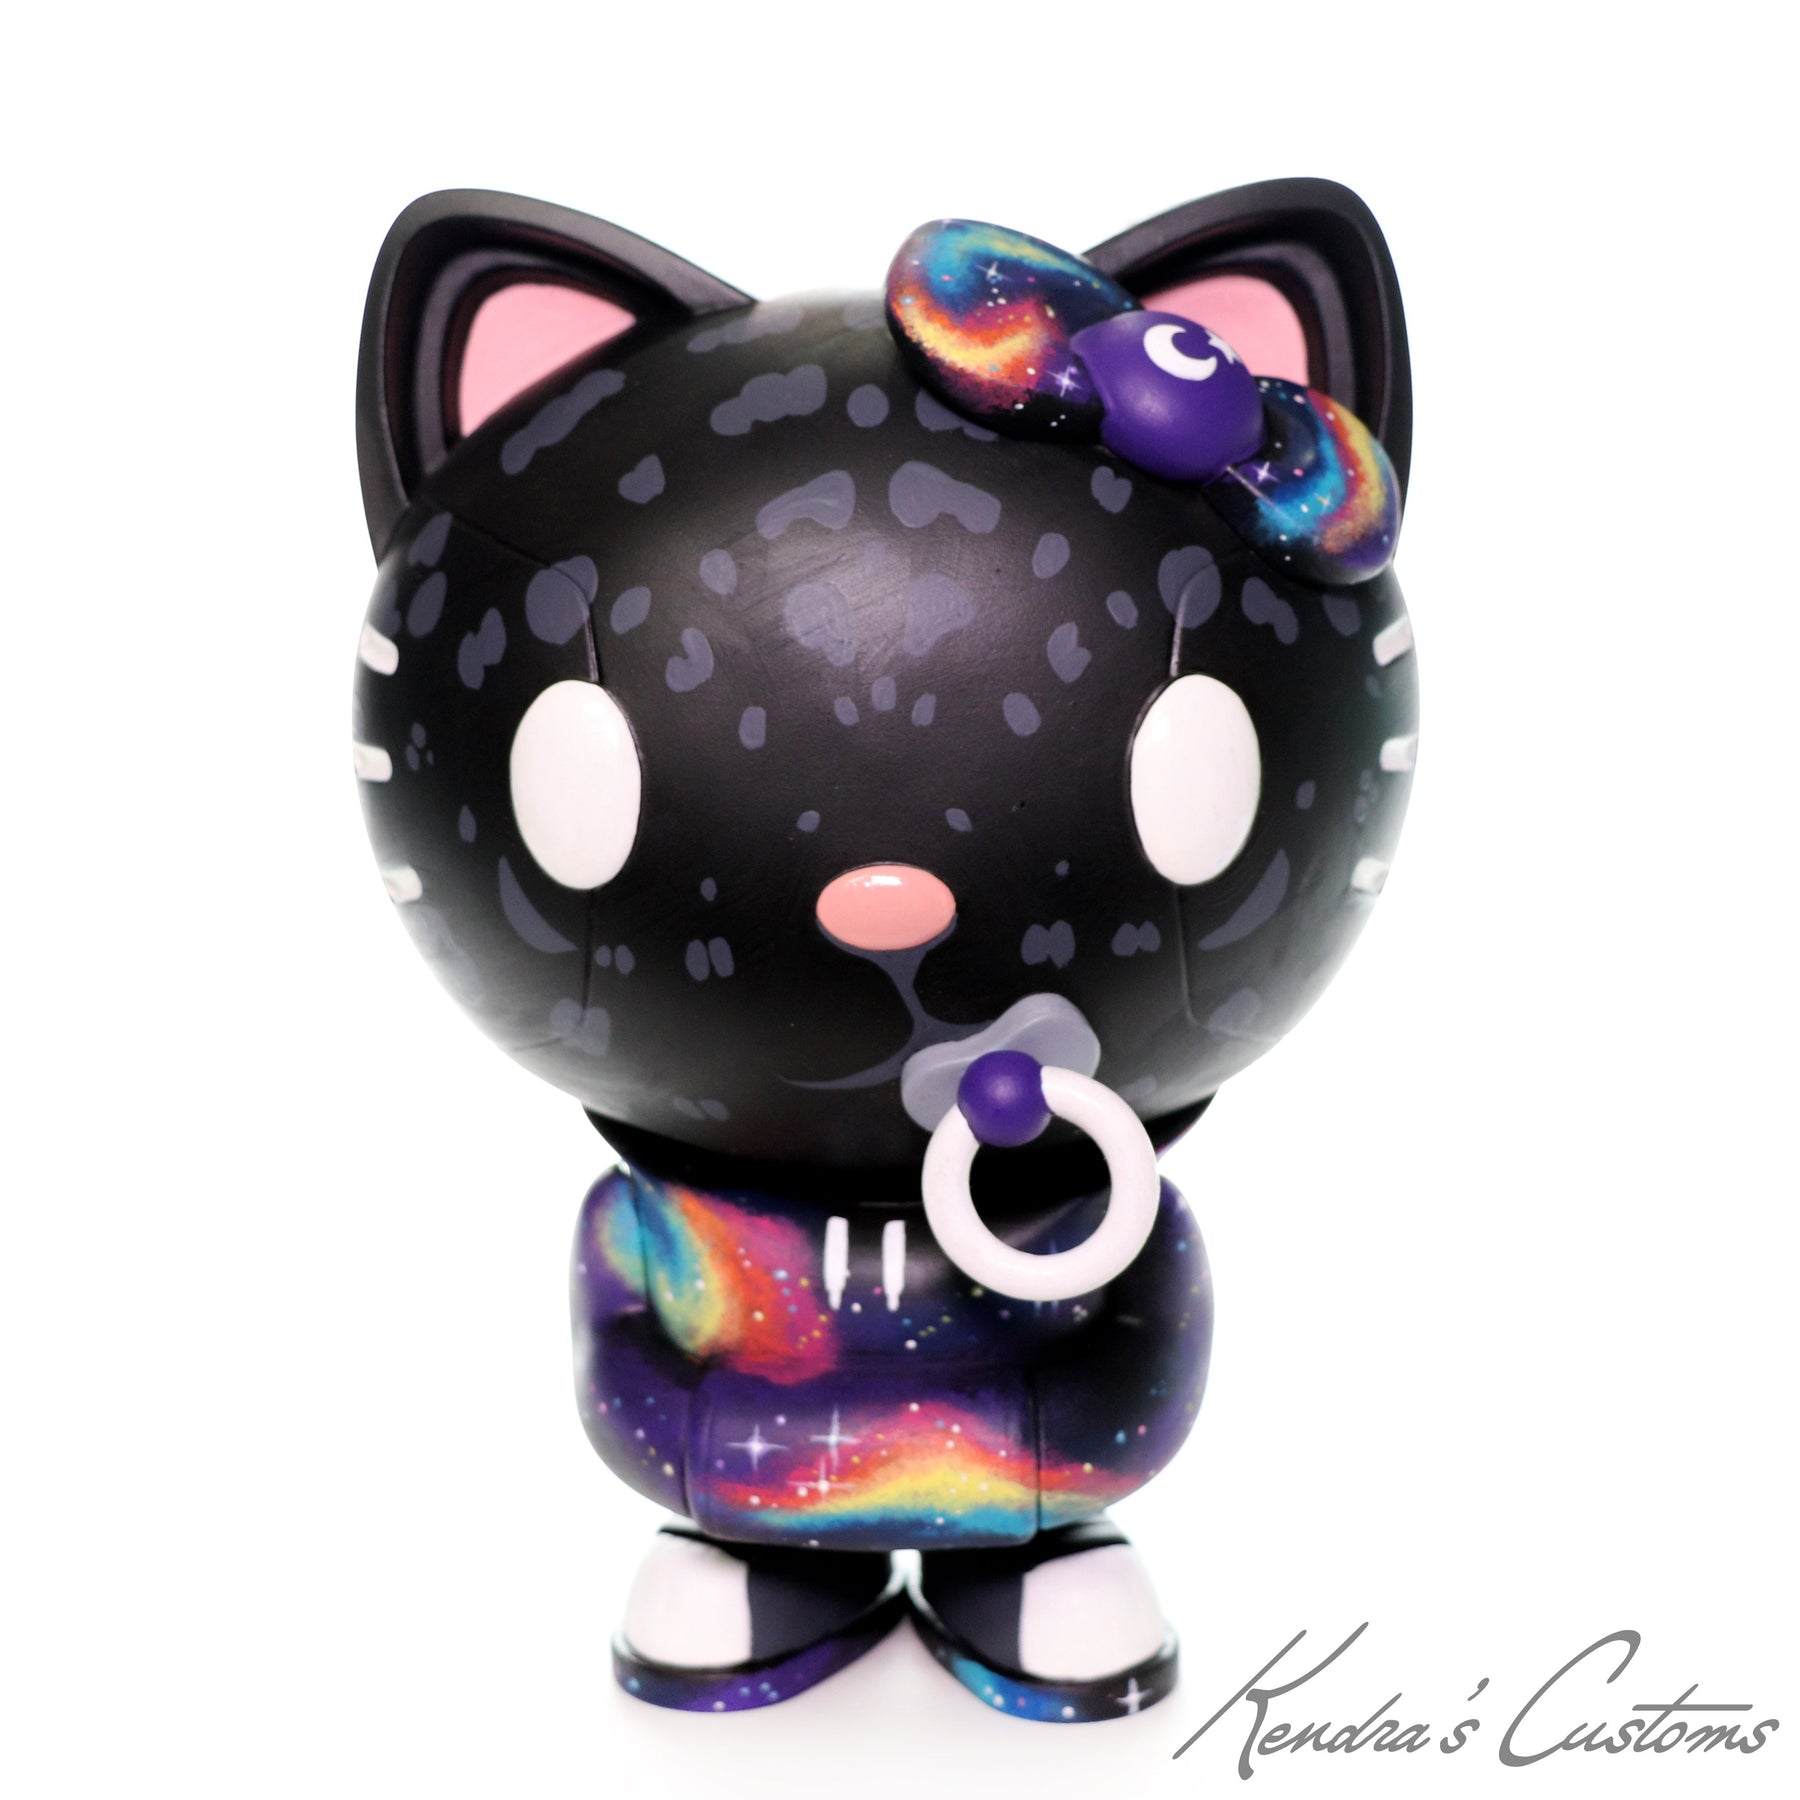 Black Jaguar Custom 6-inch Quiccs Hello Kitty by Kendra's Customs Available Now